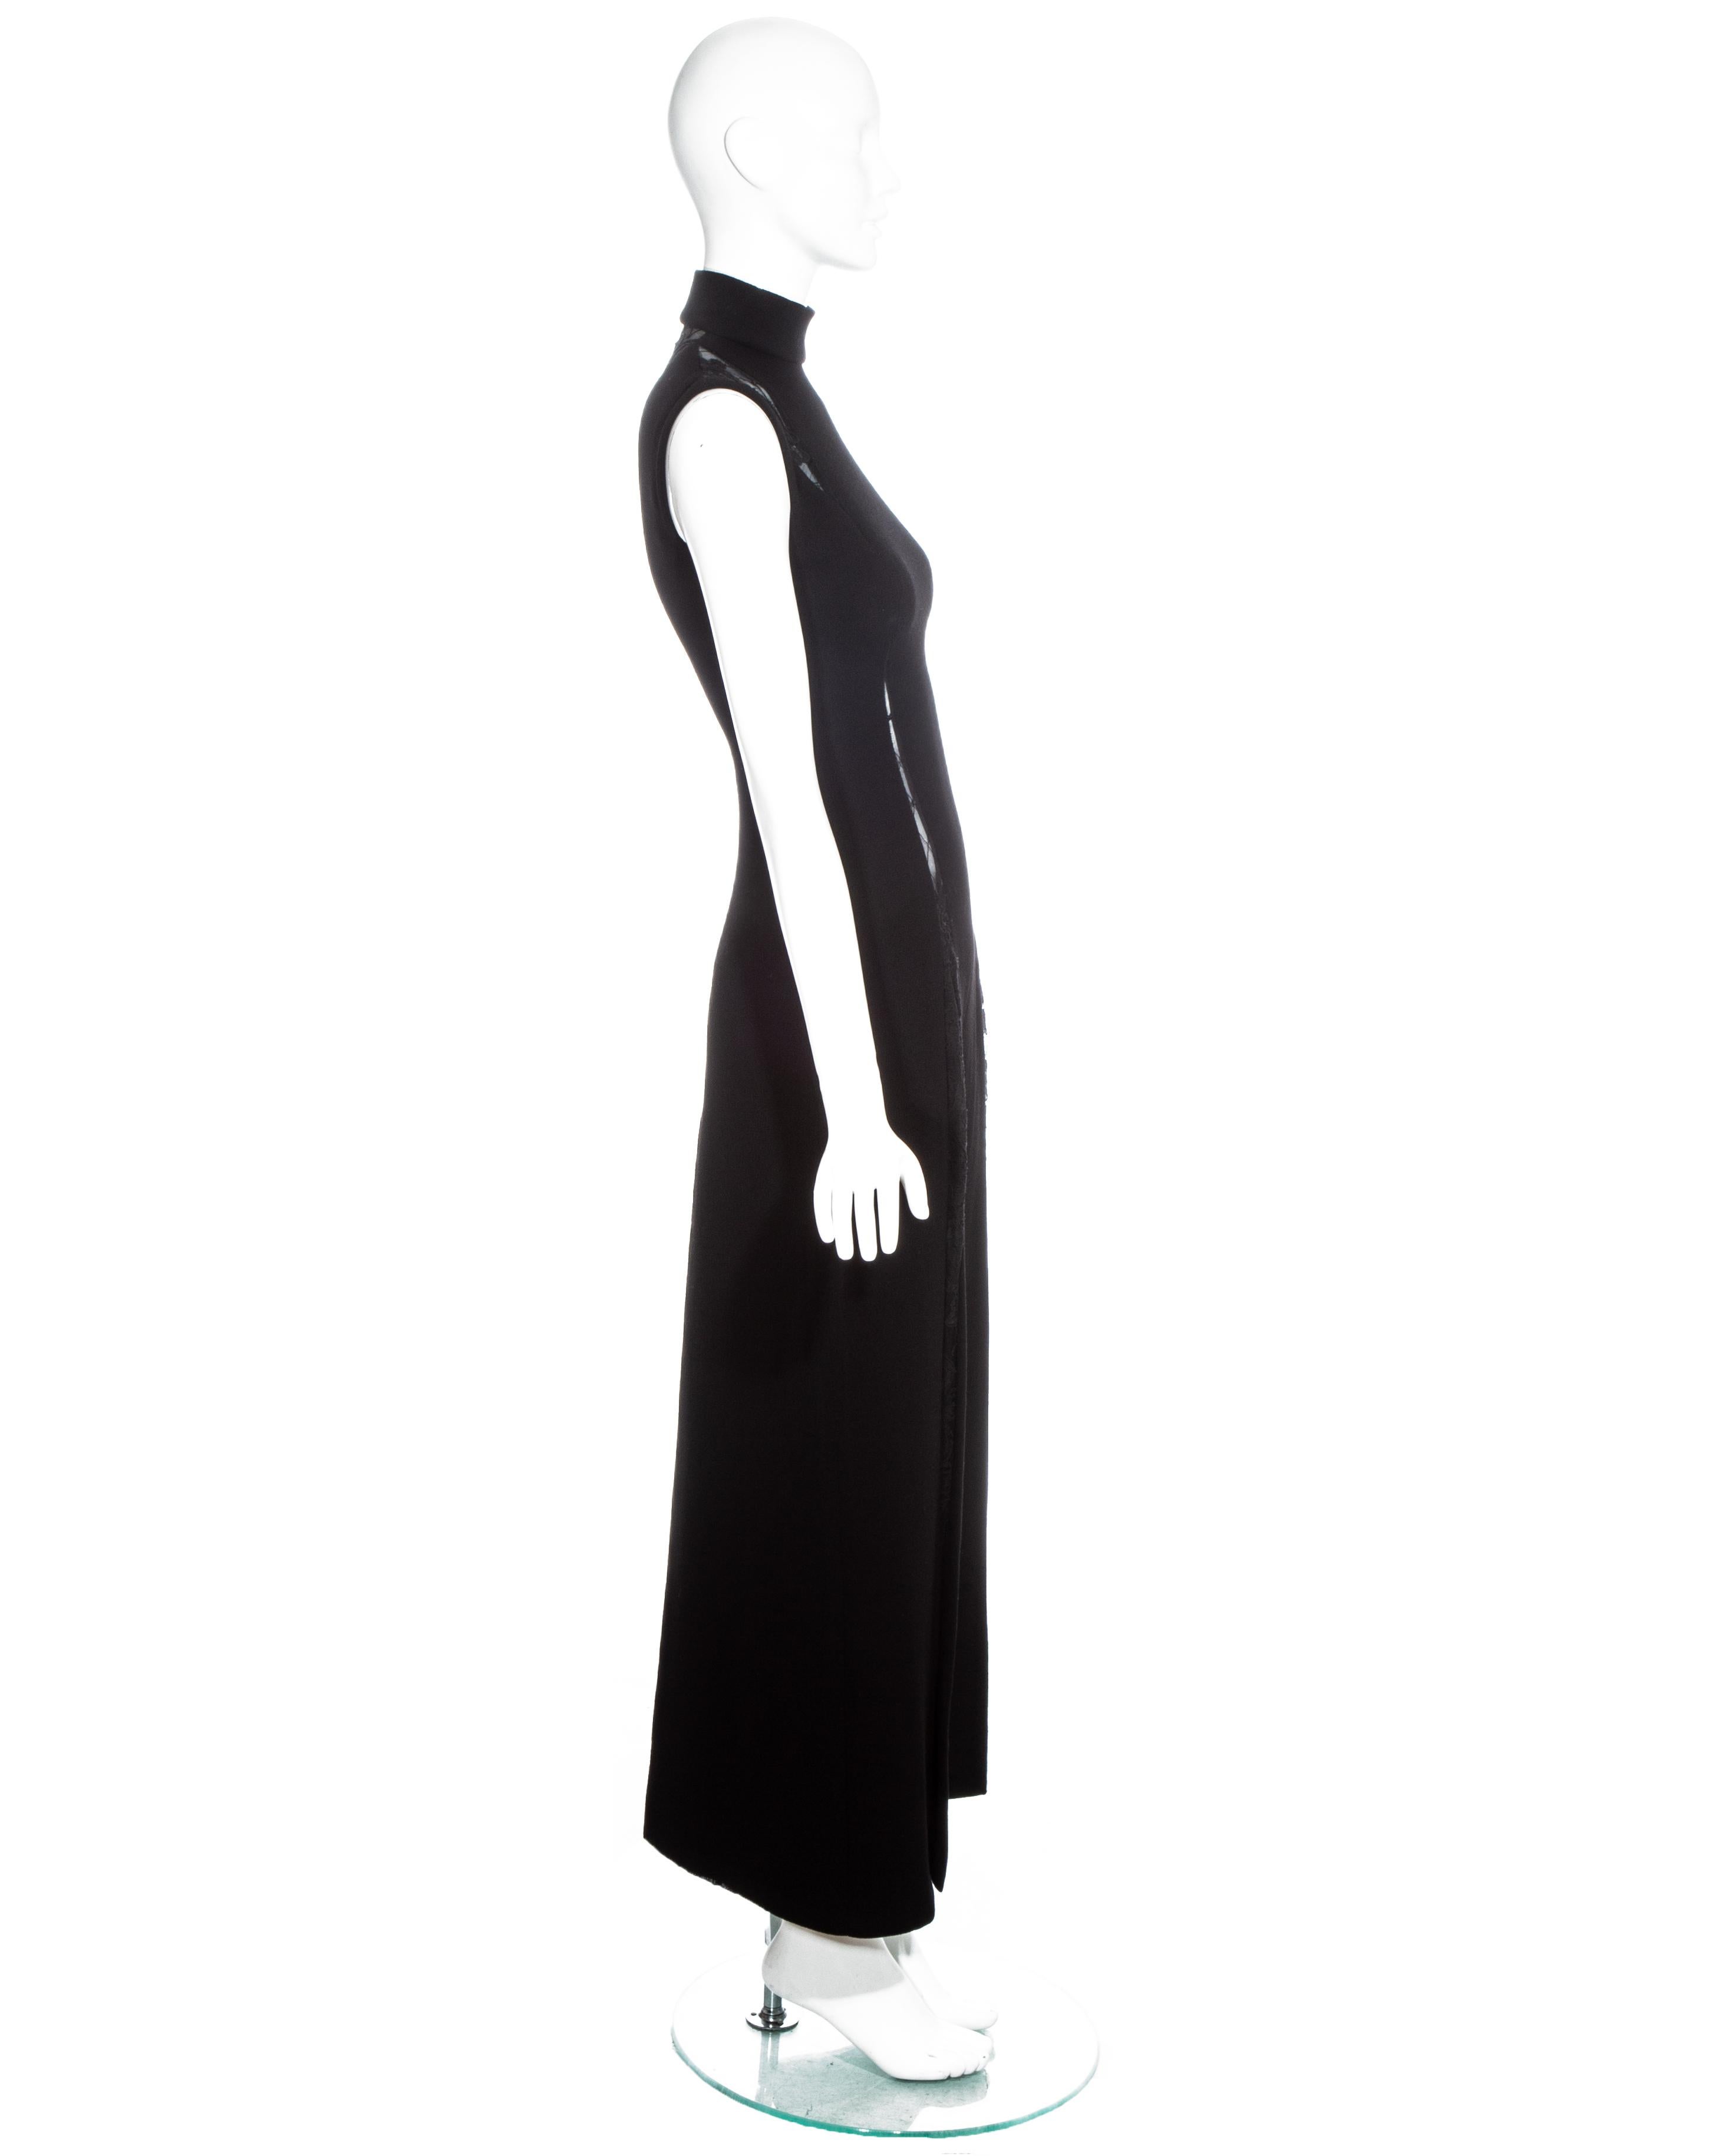 Black Gianni Versace black maxi dress with lace cut outs, fw 1993 For Sale